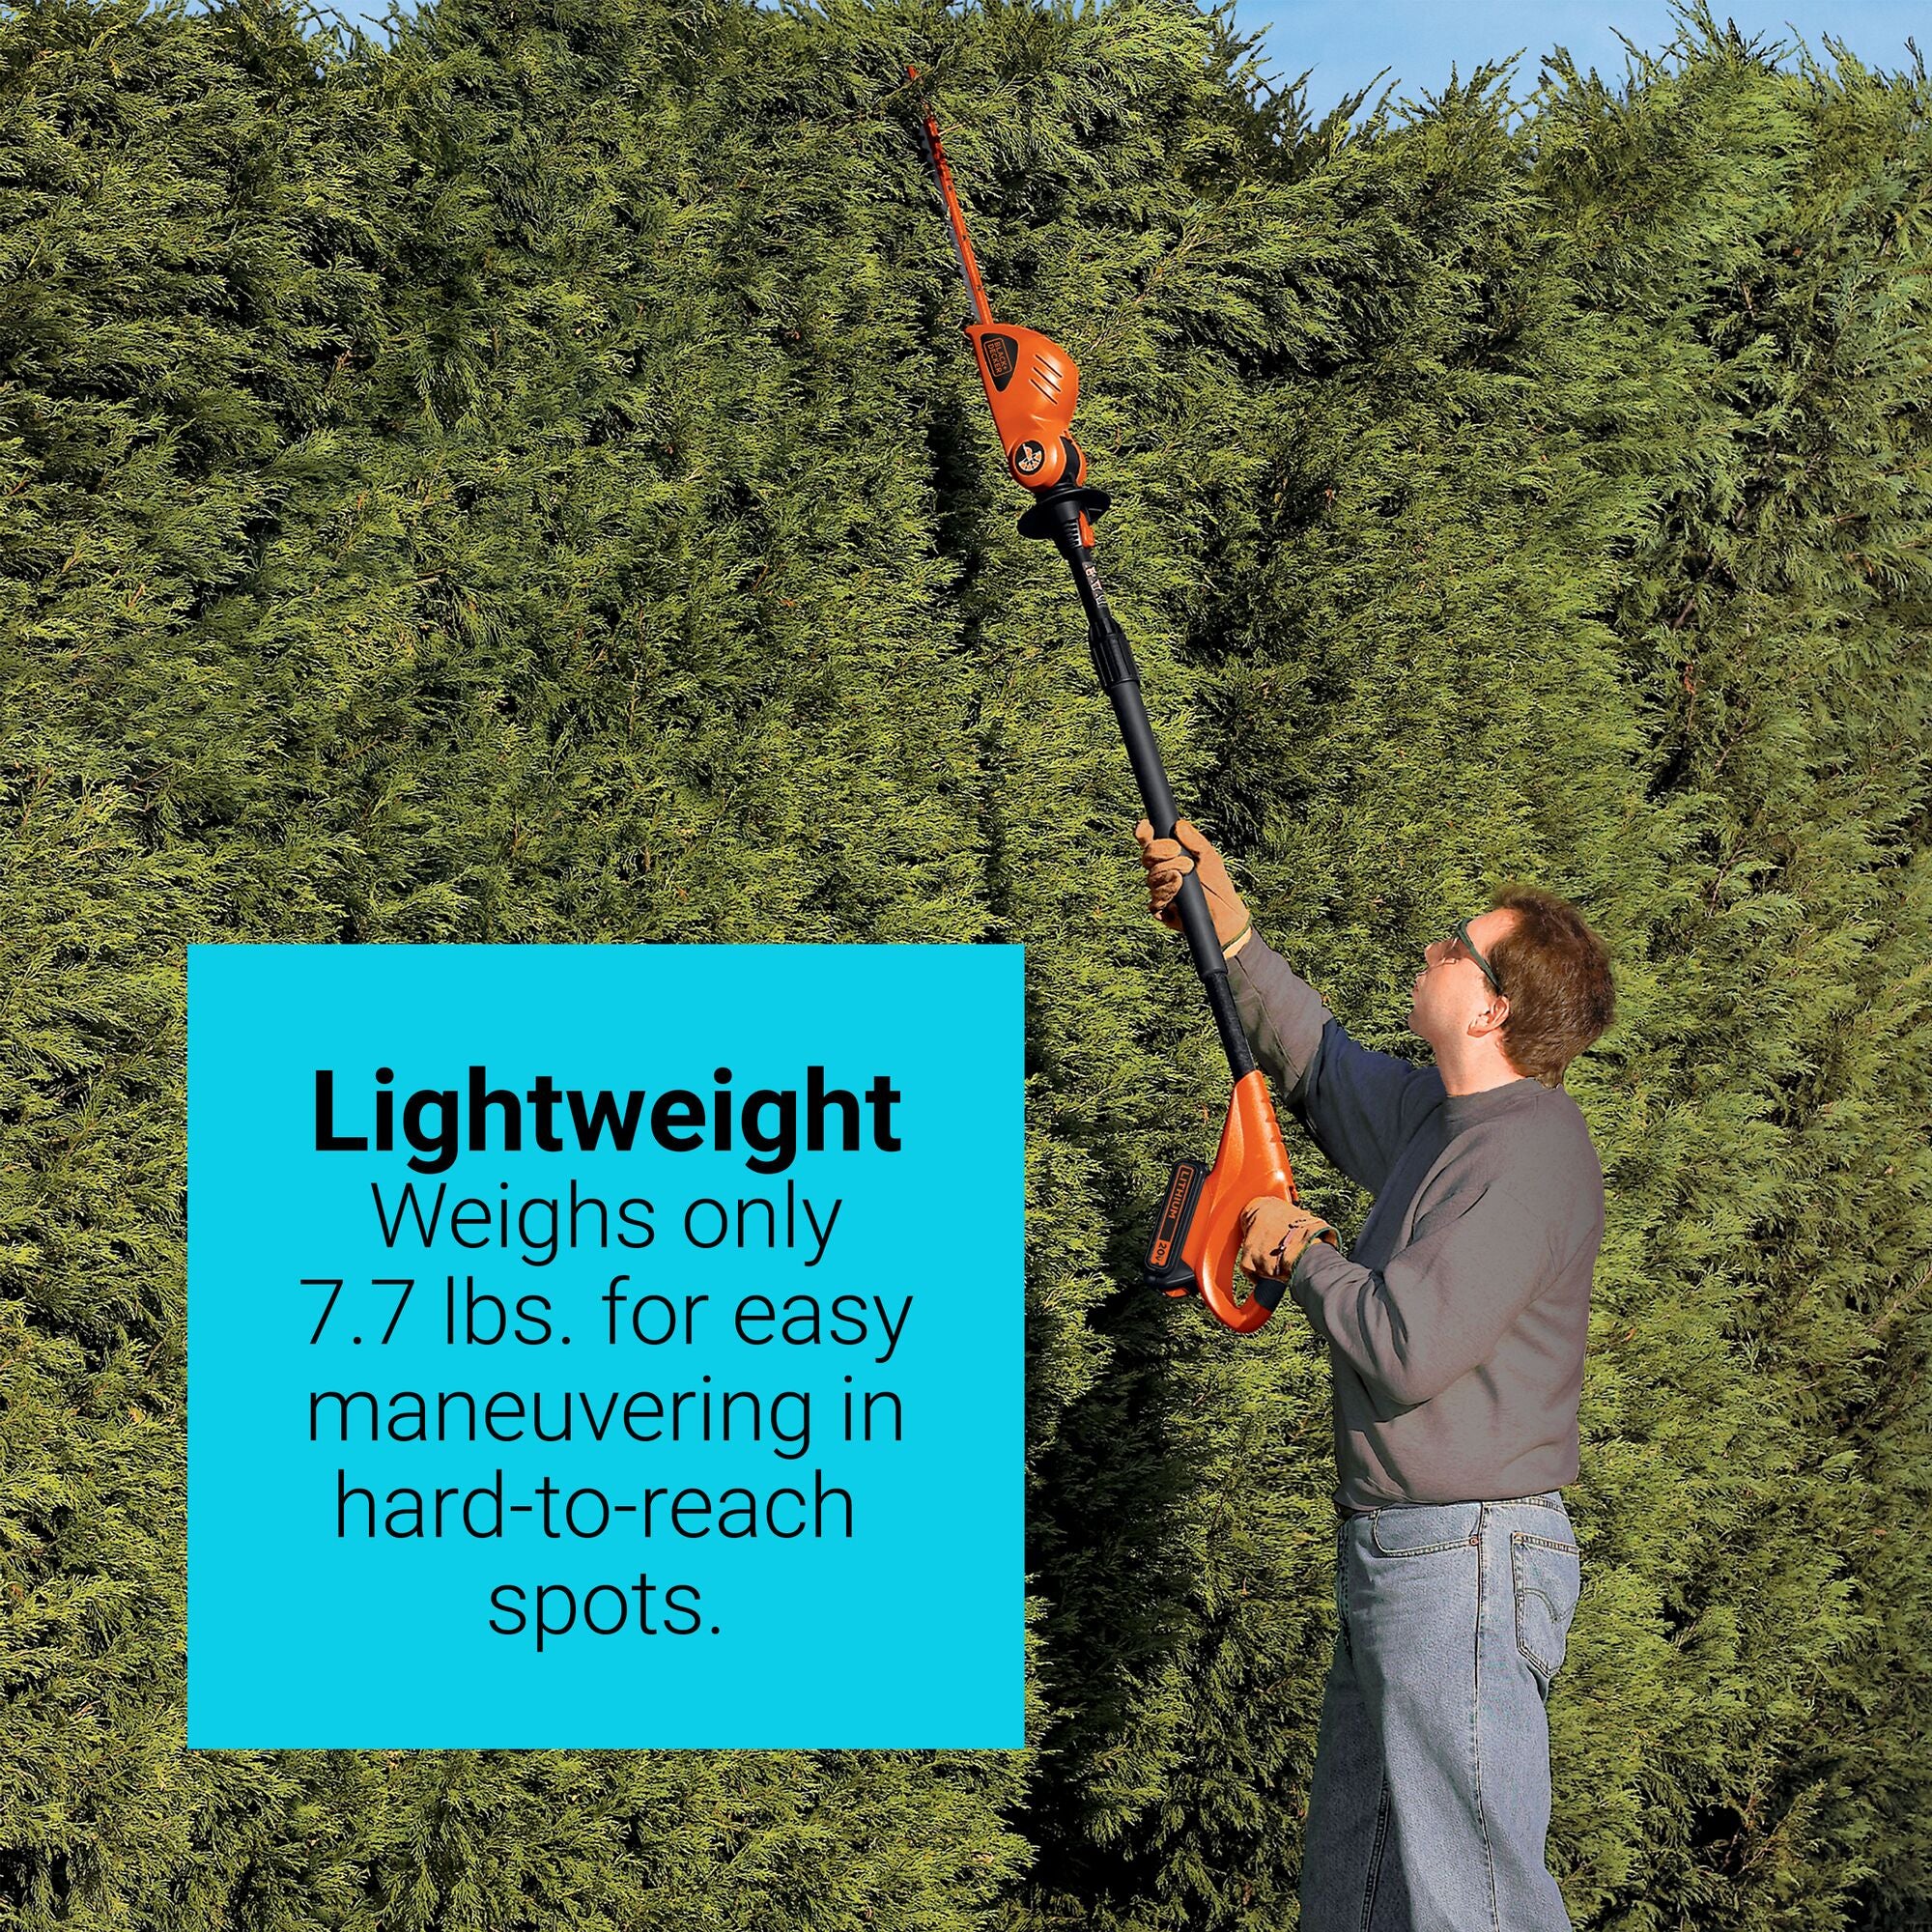 20 Volt Lithium Pole Hedge Trimmer Battery and Charger Not Included being used by a person on hedge\.